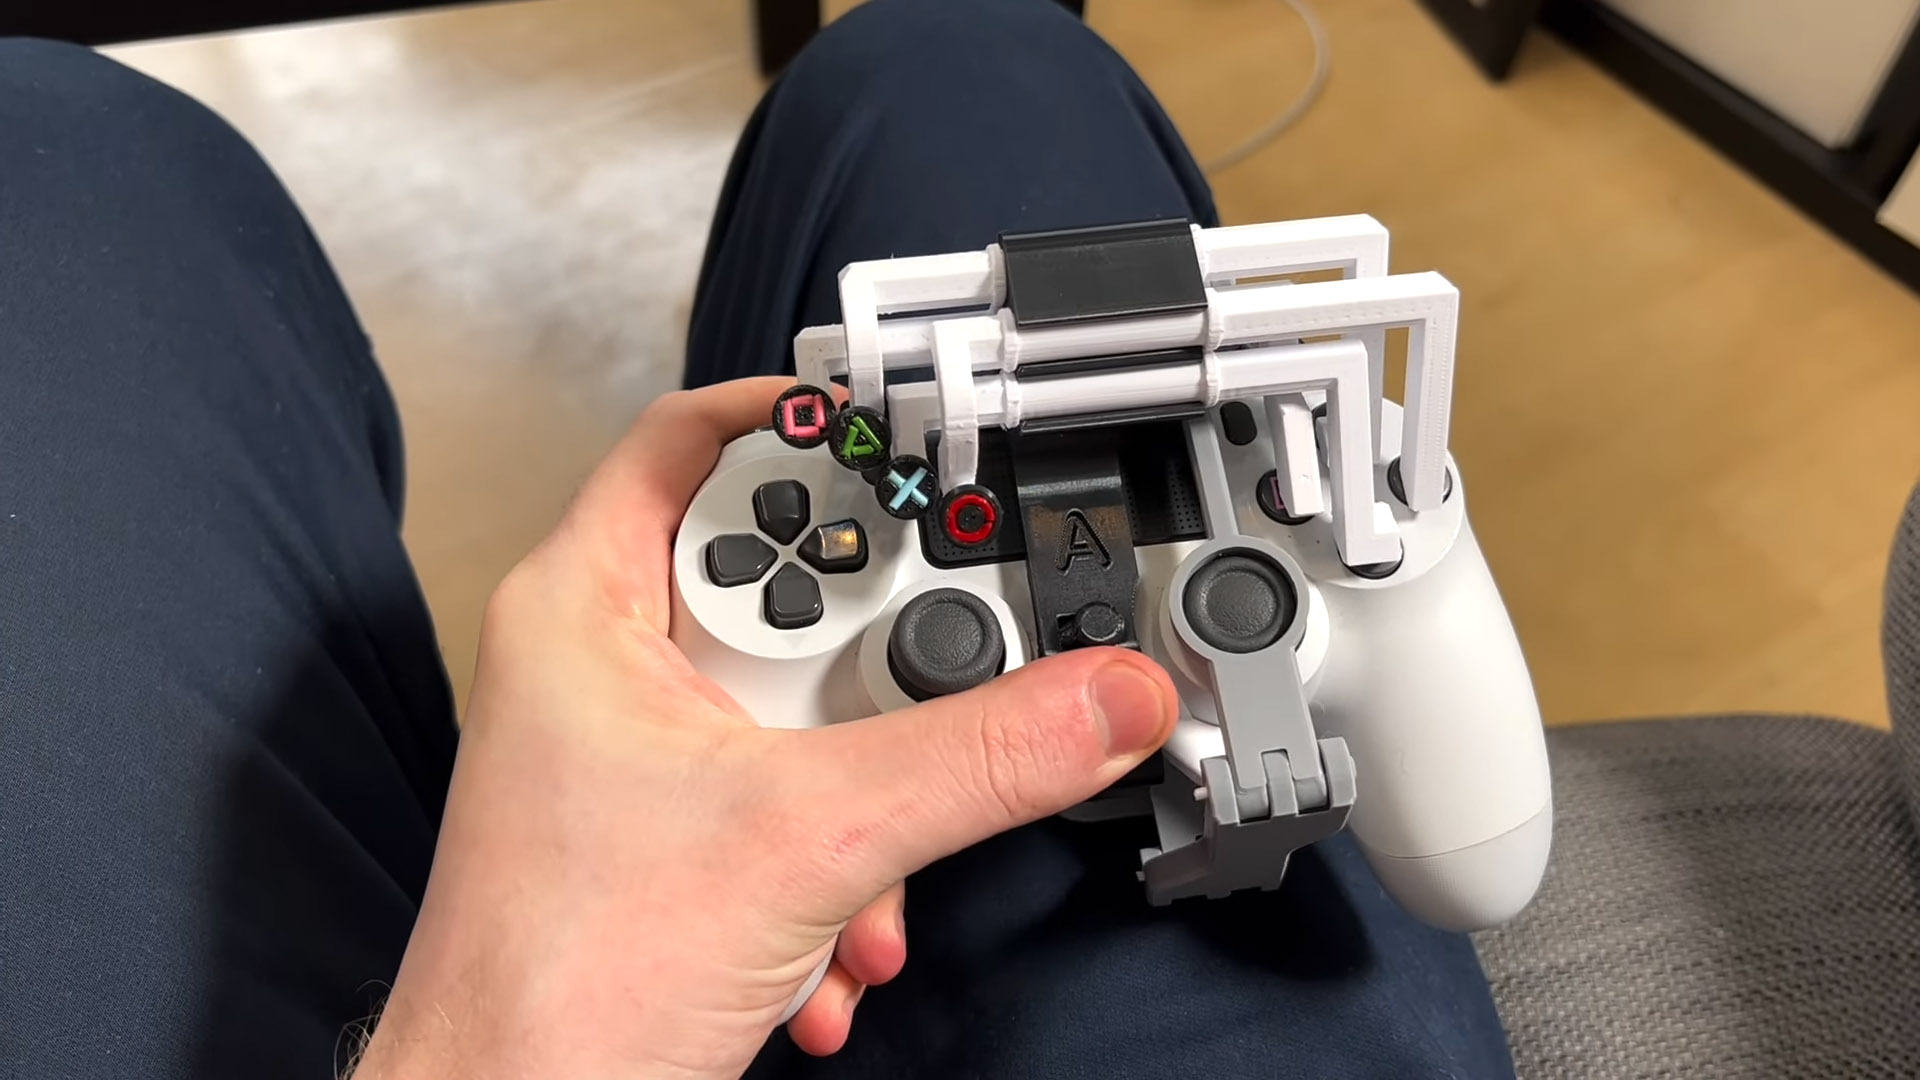 Onnauwkeurig serie Overvloedig 3D-printed PlayStation controller mod allows one-handed PS4 and PS5 gaming  - NotebookCheck.net News